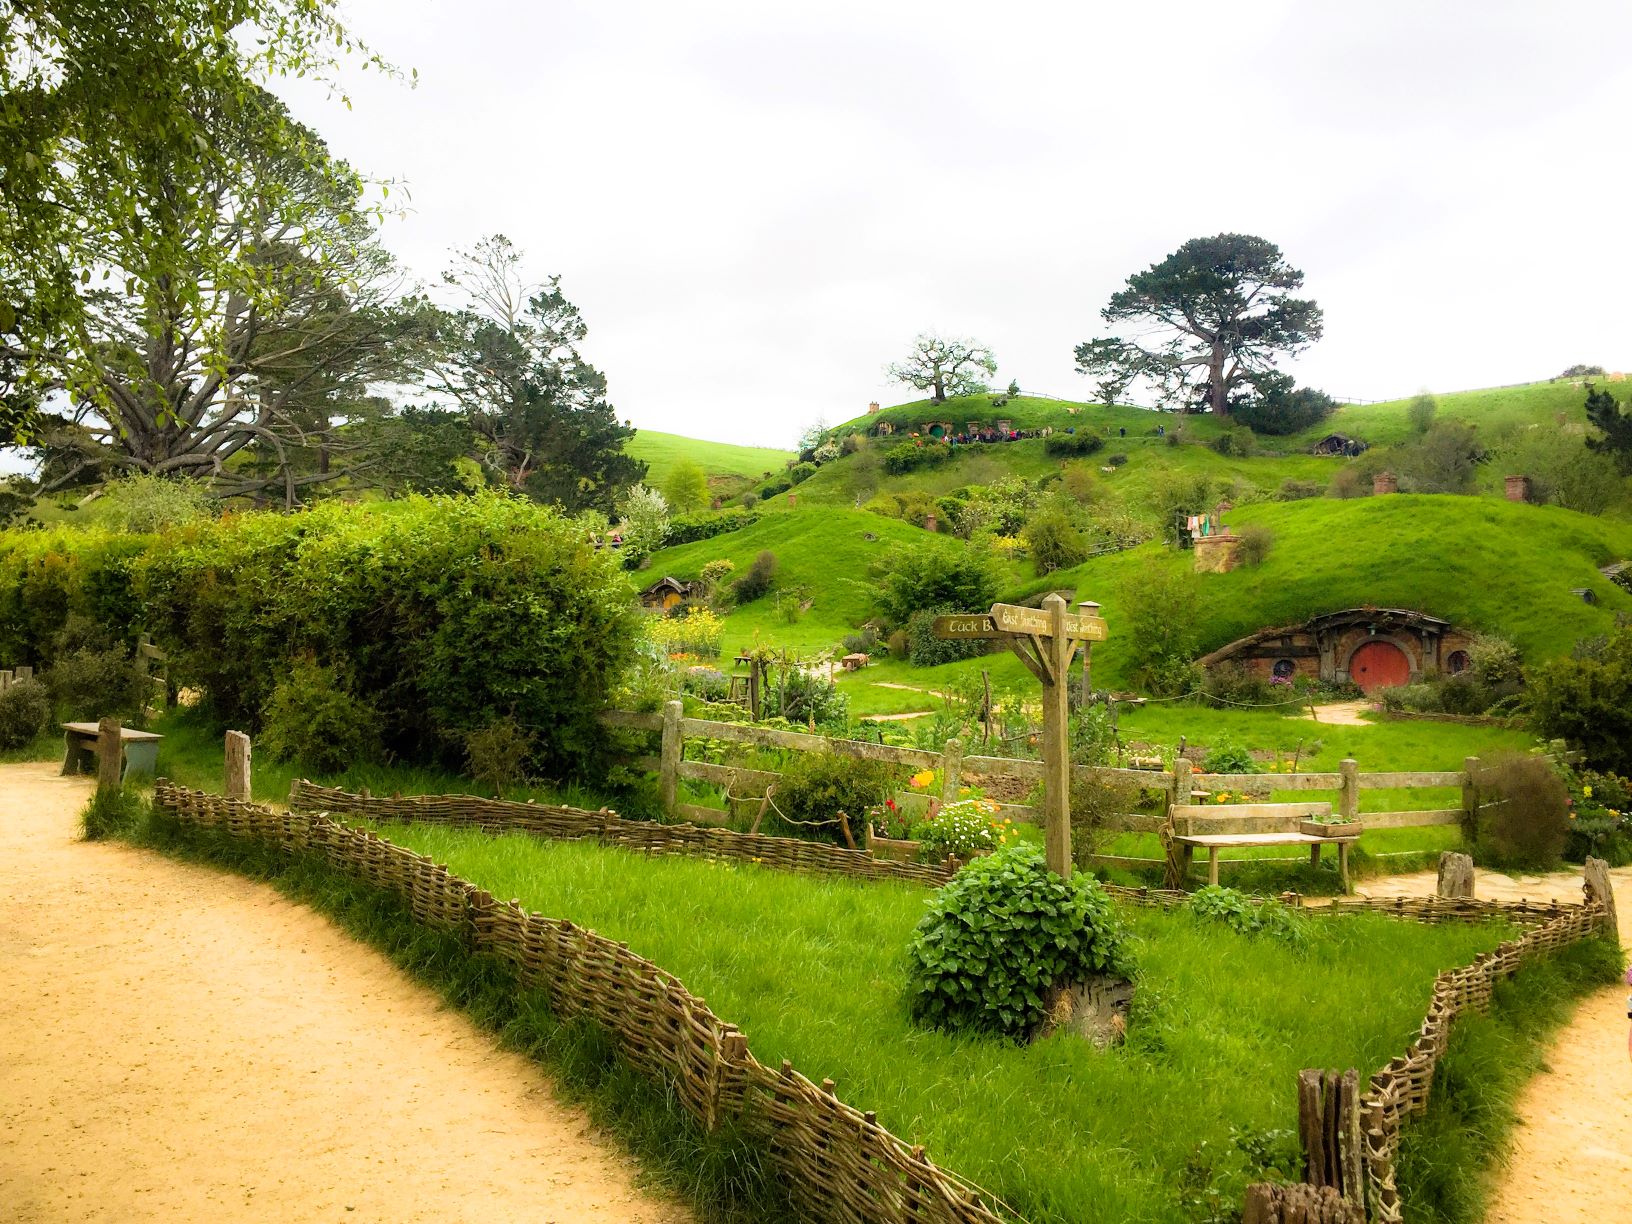 My Travel Diary Webseries Part 3: Waitomo Caves and ‘The Lord of the Rings’ Hobbiton Movie Set